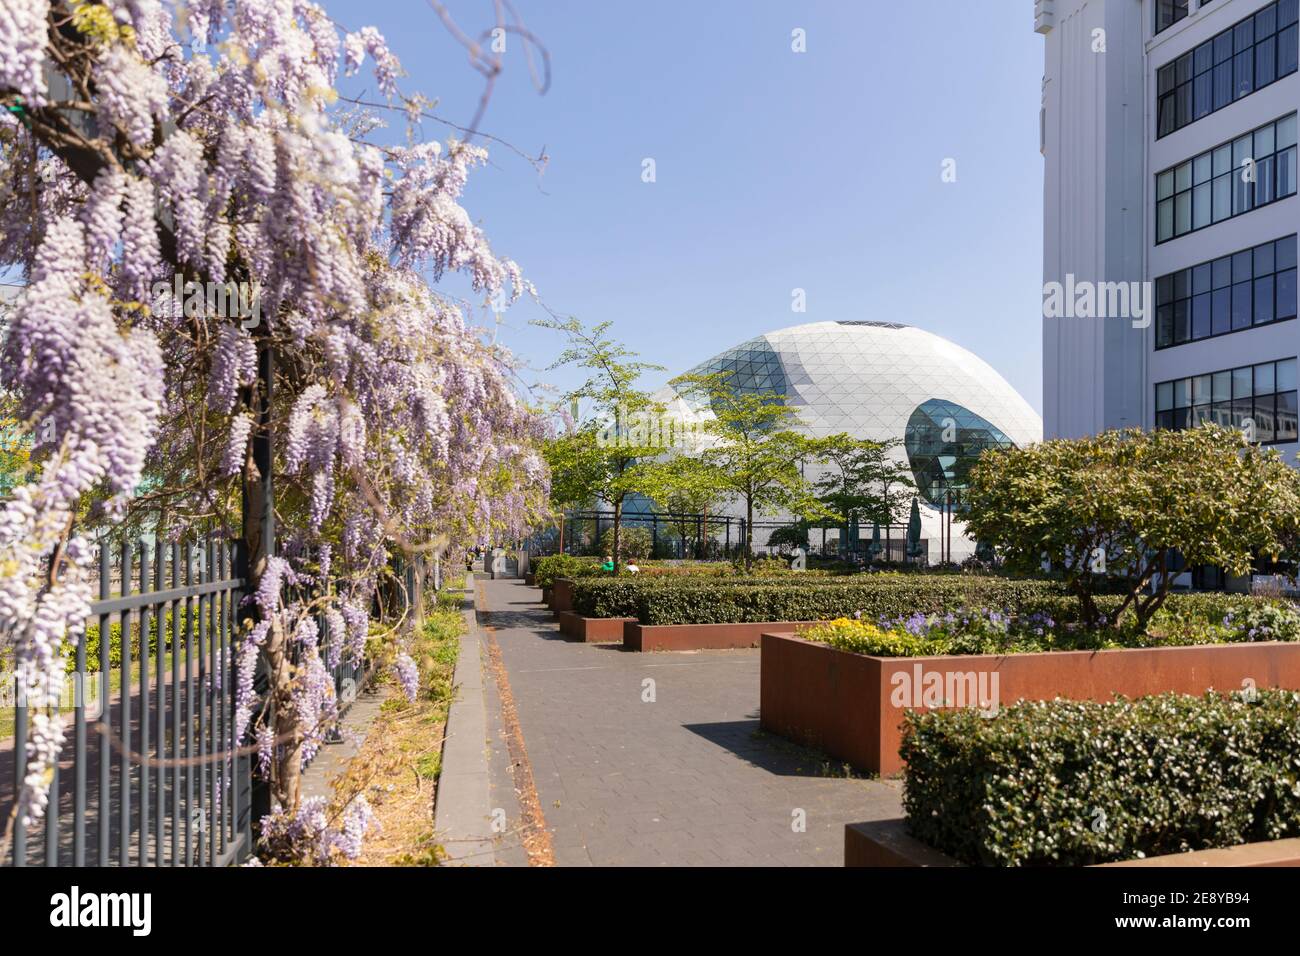 Eindhoven, The Netherlands, April 21st 2020. Exterior of the famous ’Blob’ building designed by Massimiliano Fuksas surrounded by a greenery and bloss Stock Photo